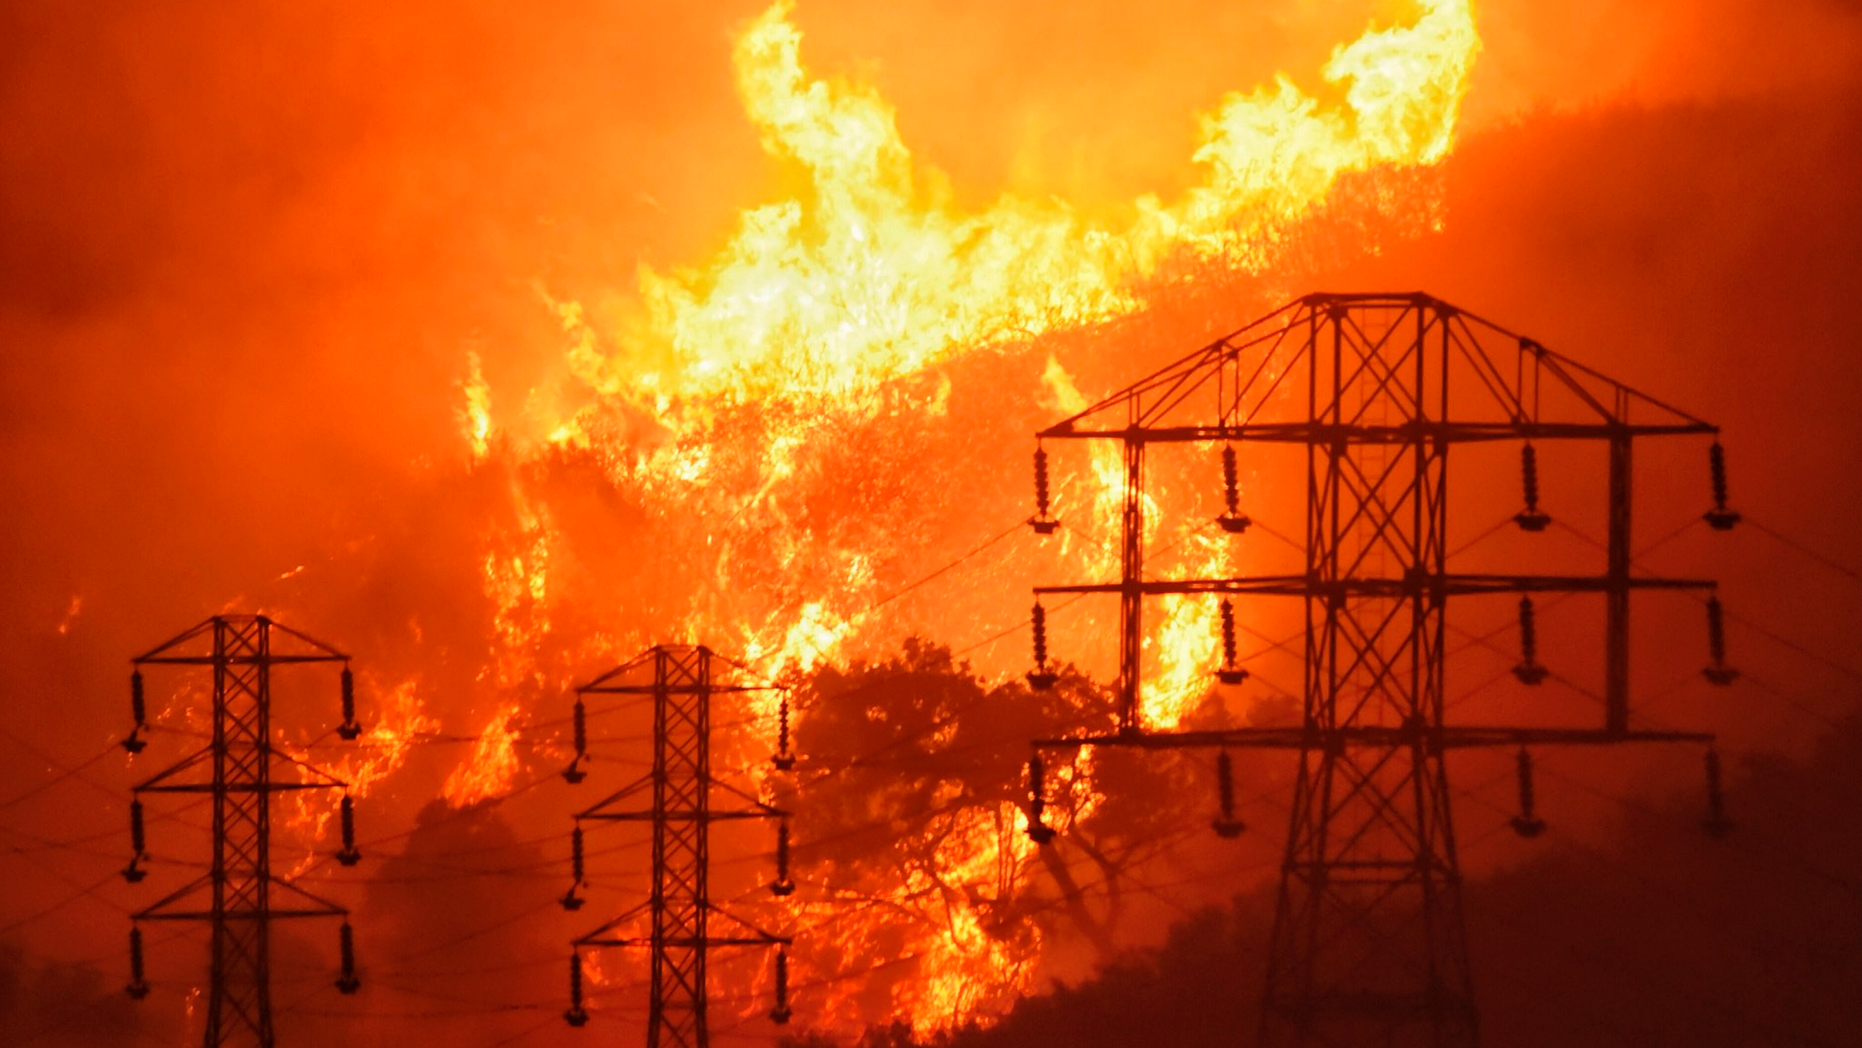 REPORT - In this December 16, 2017 photo provided by the Santa Barbara County Fire Department, flames are burning near power lines in Sycamore Canyon, near West Mountain Drive, Montecito, California. An investigation has determined that one of the largest and most destructive fires in California's history have been caused by power lines coming into contact in high winds. The Ventura County Fire Department announced on Wednesday, March 13, 2019 that the power lines in Southern California to Edison came into contact with a dry brush on December 4, 2017, and had finally blackened more than 440 square kilometers (1 139 square kilometers). (Mike Eliason / Santa Barbara County Fire Department via AP, File)